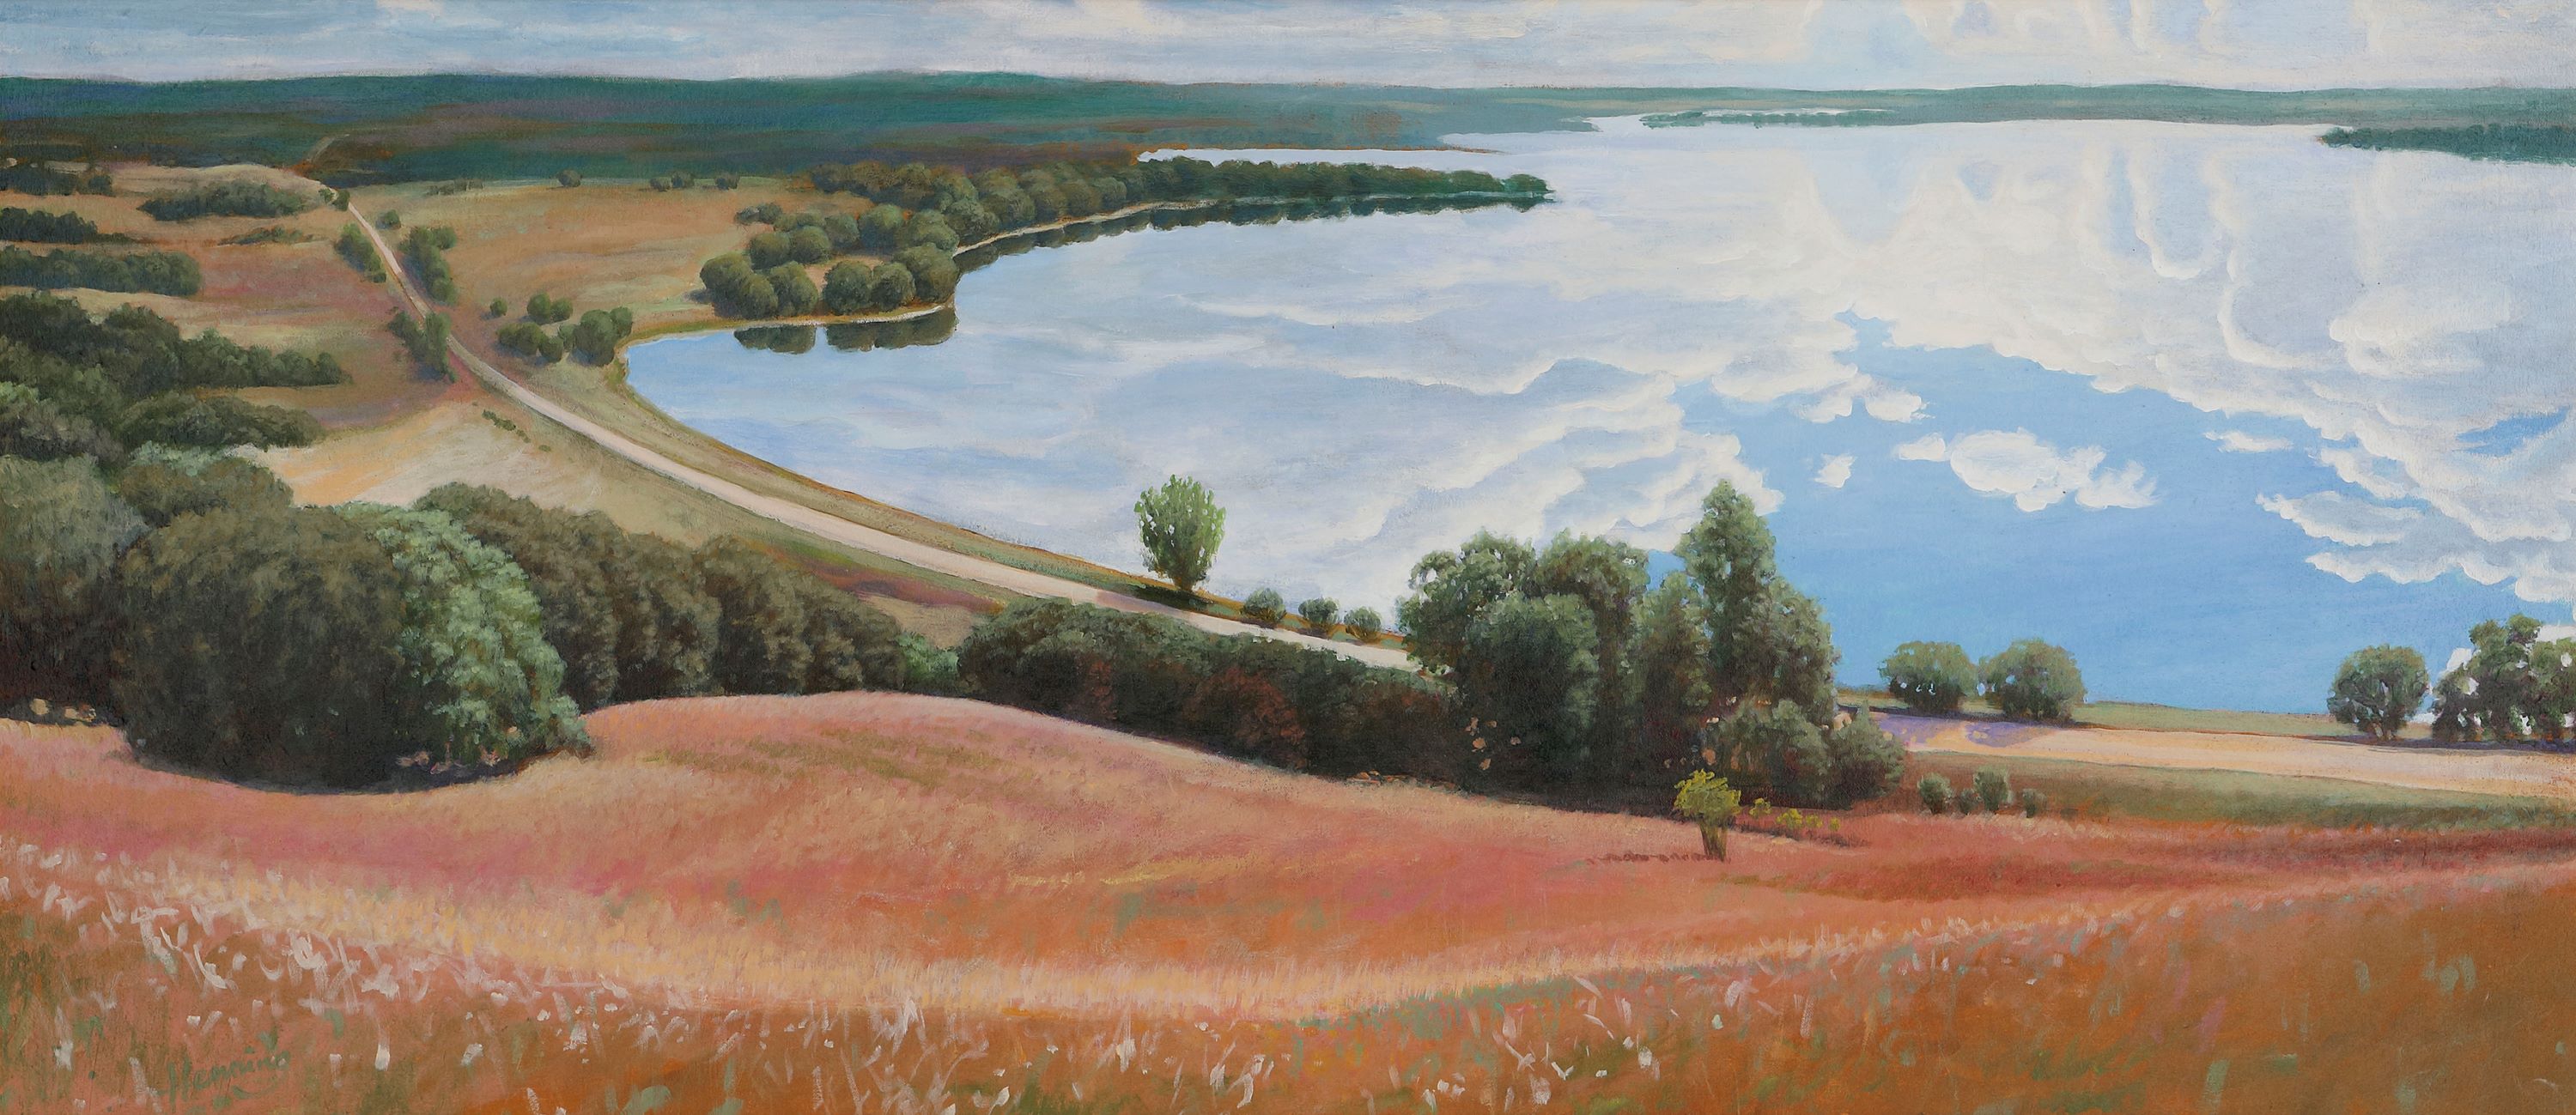 "View From 7 Sisters," a painting of an Otter Tail County landscape by longtime Minnesota painter Stephen Henning.